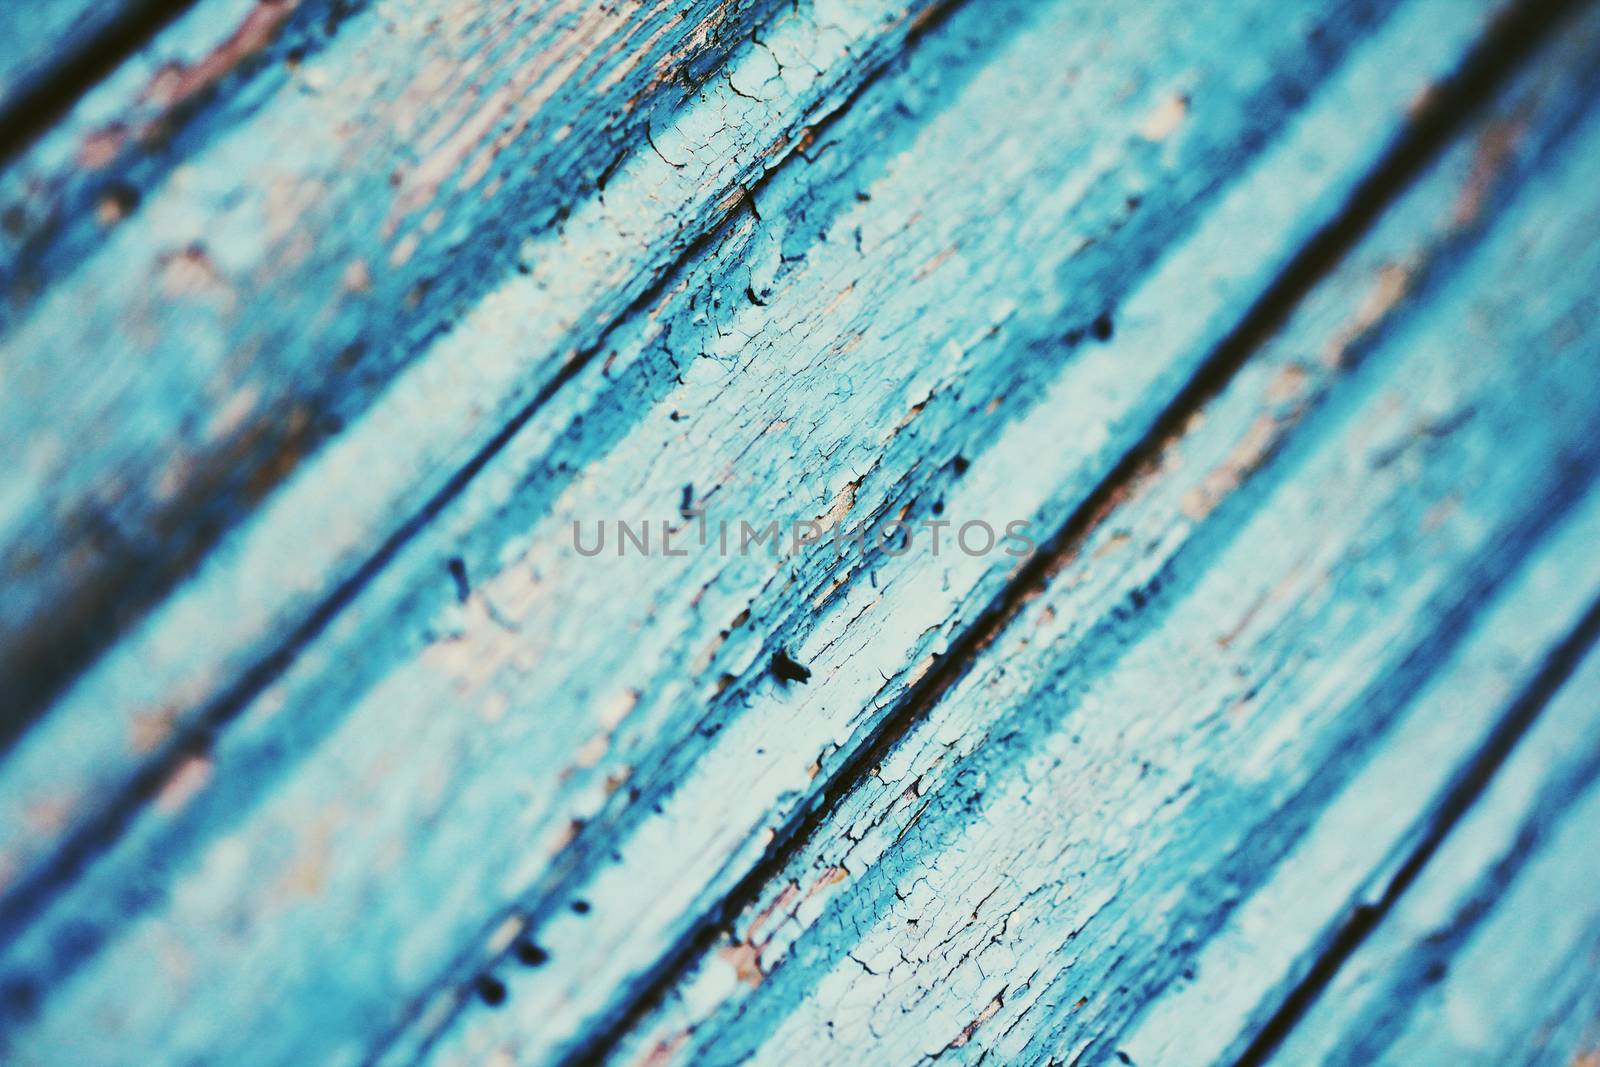 Cracked paint on blue wooden surface close up photo